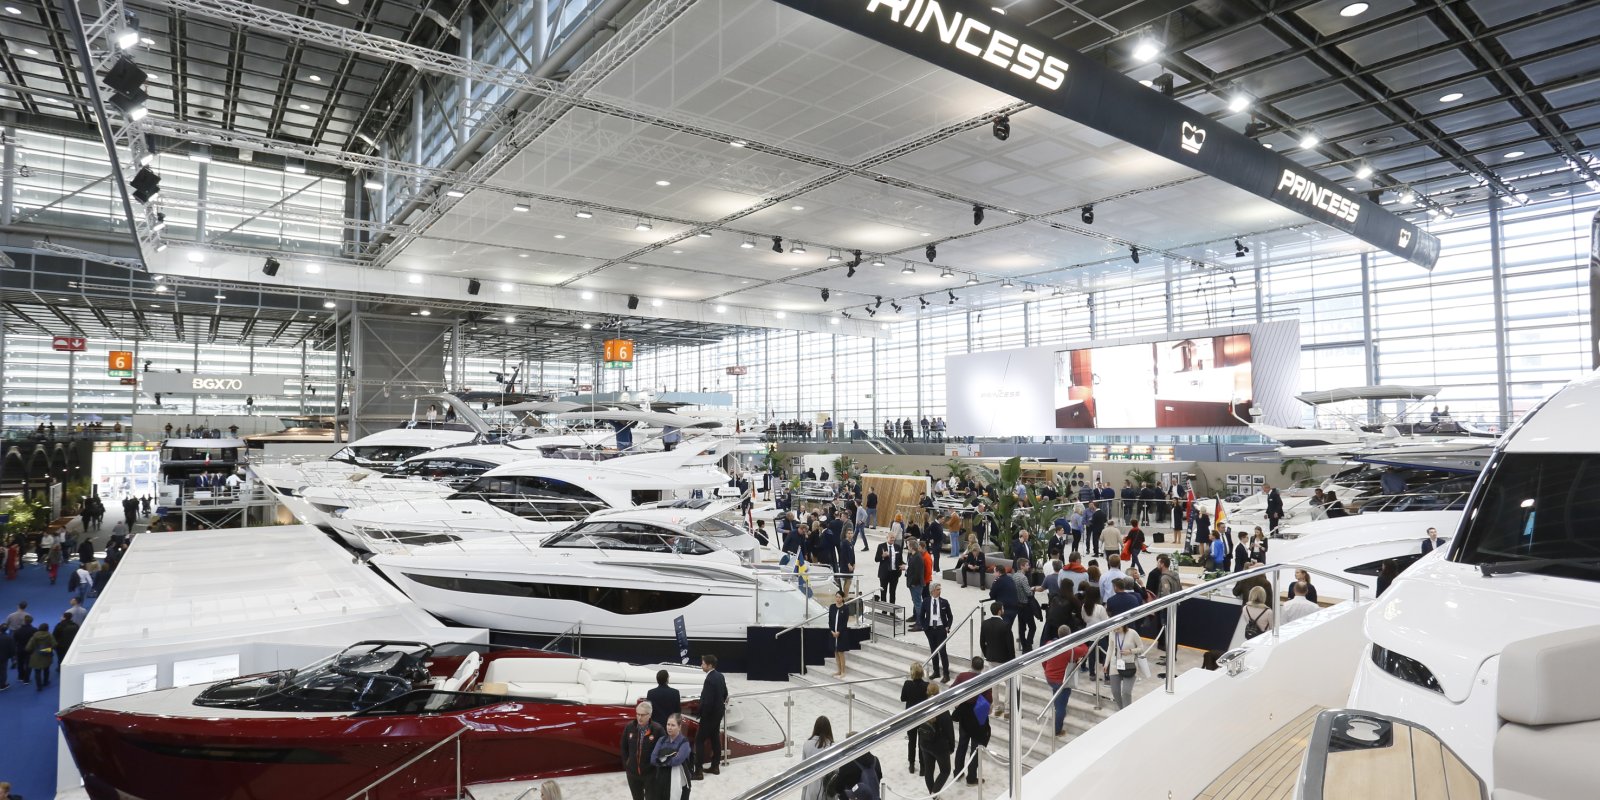 New Yachts exhibited in Dusseldorf Yacht Show